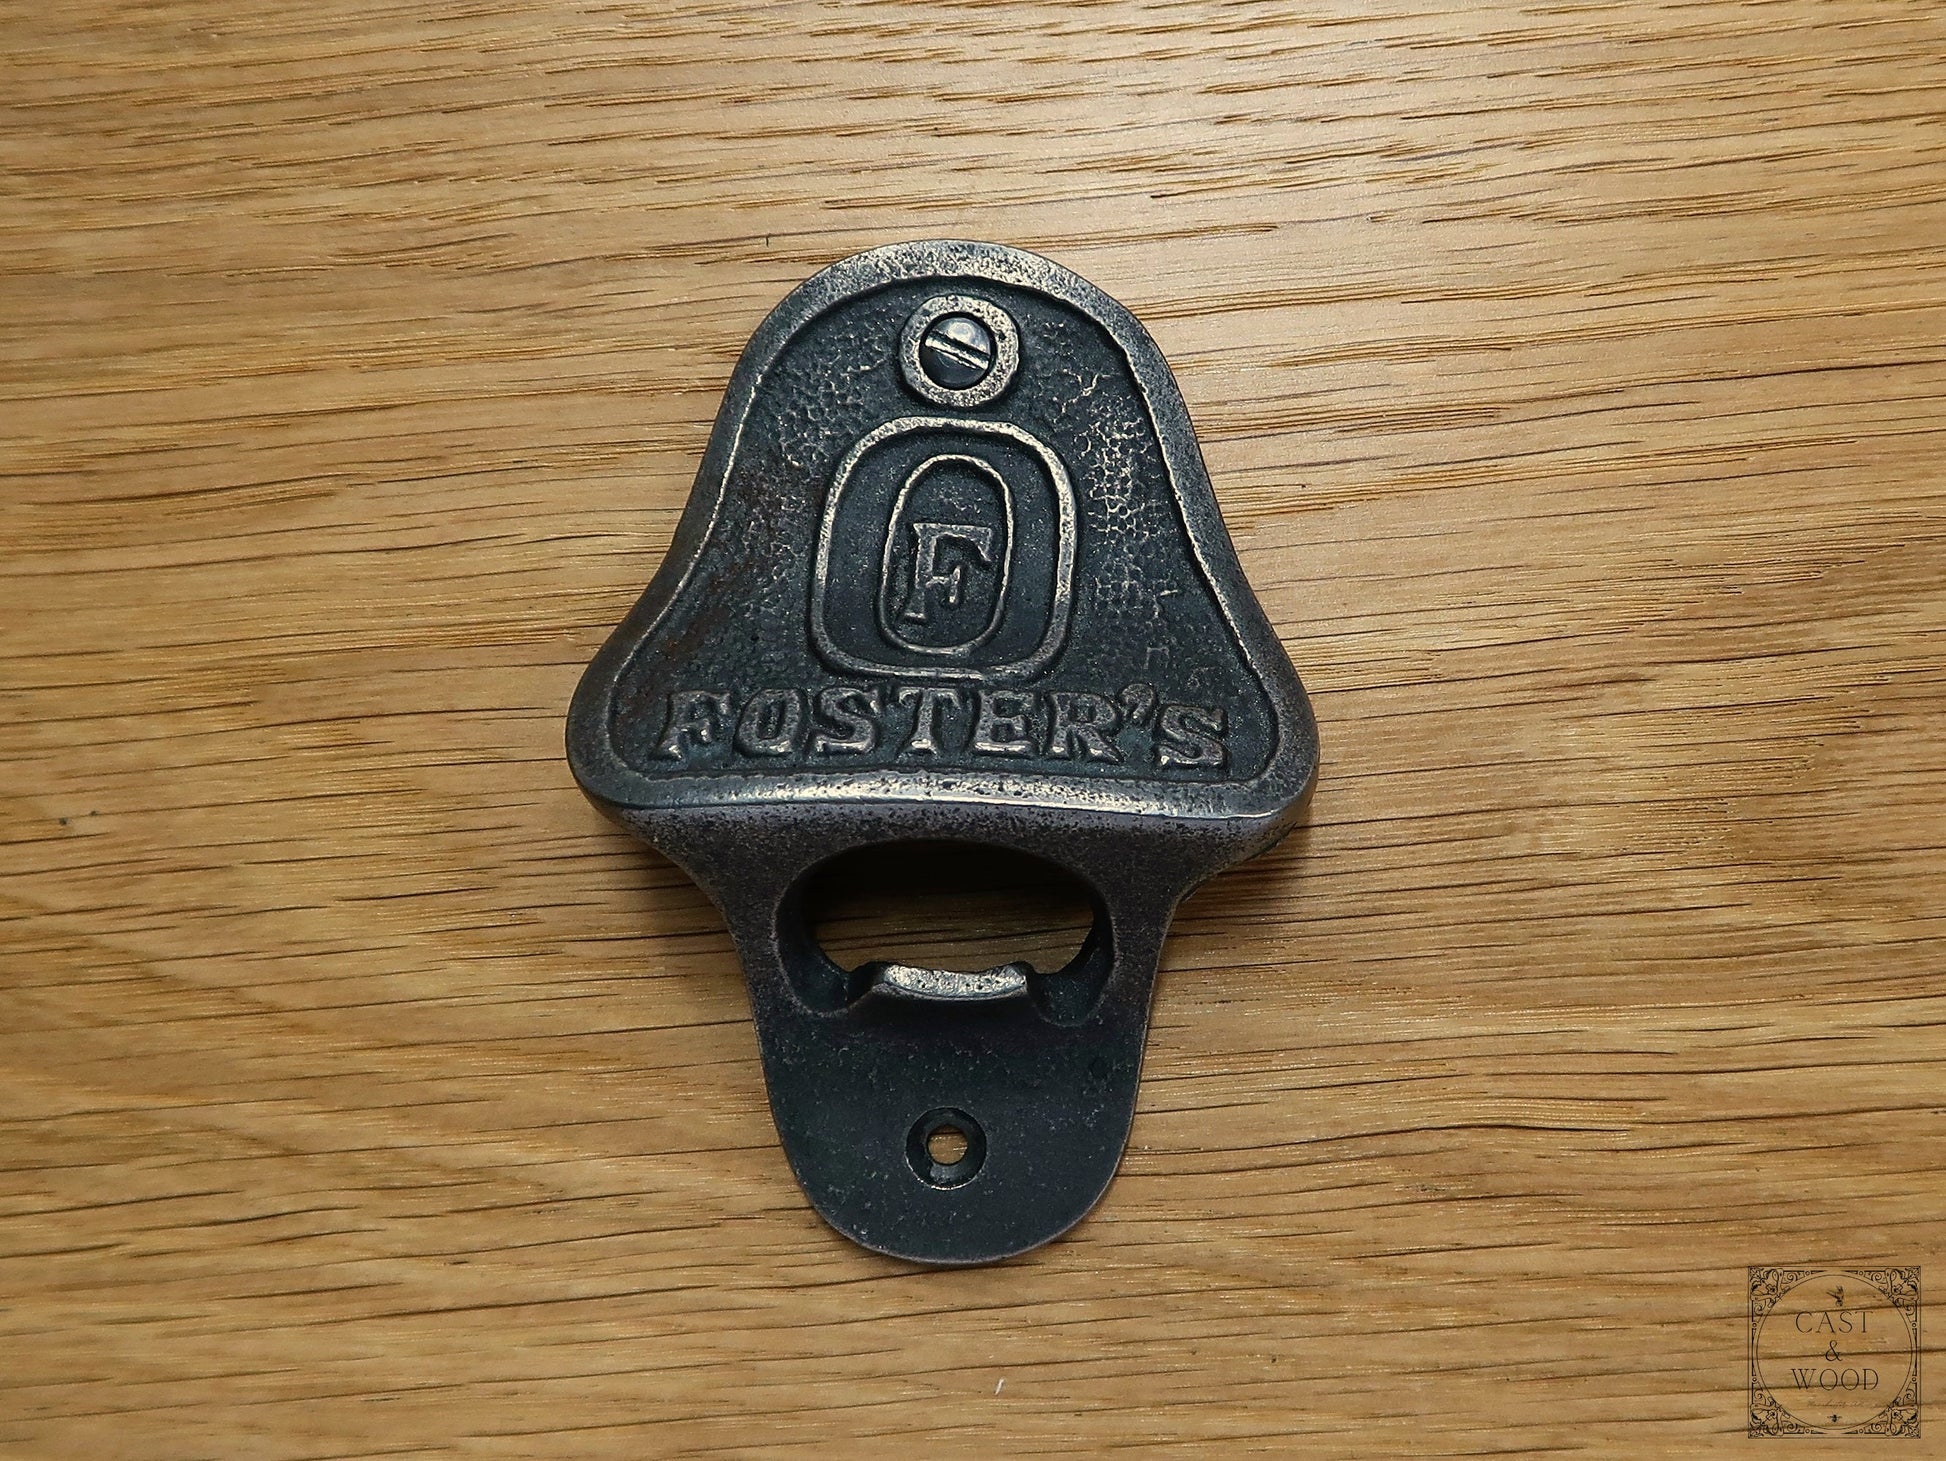 FOSTERS Cast Iron Wall Mounted Bottle Opener freeshipping - Cast & Wood